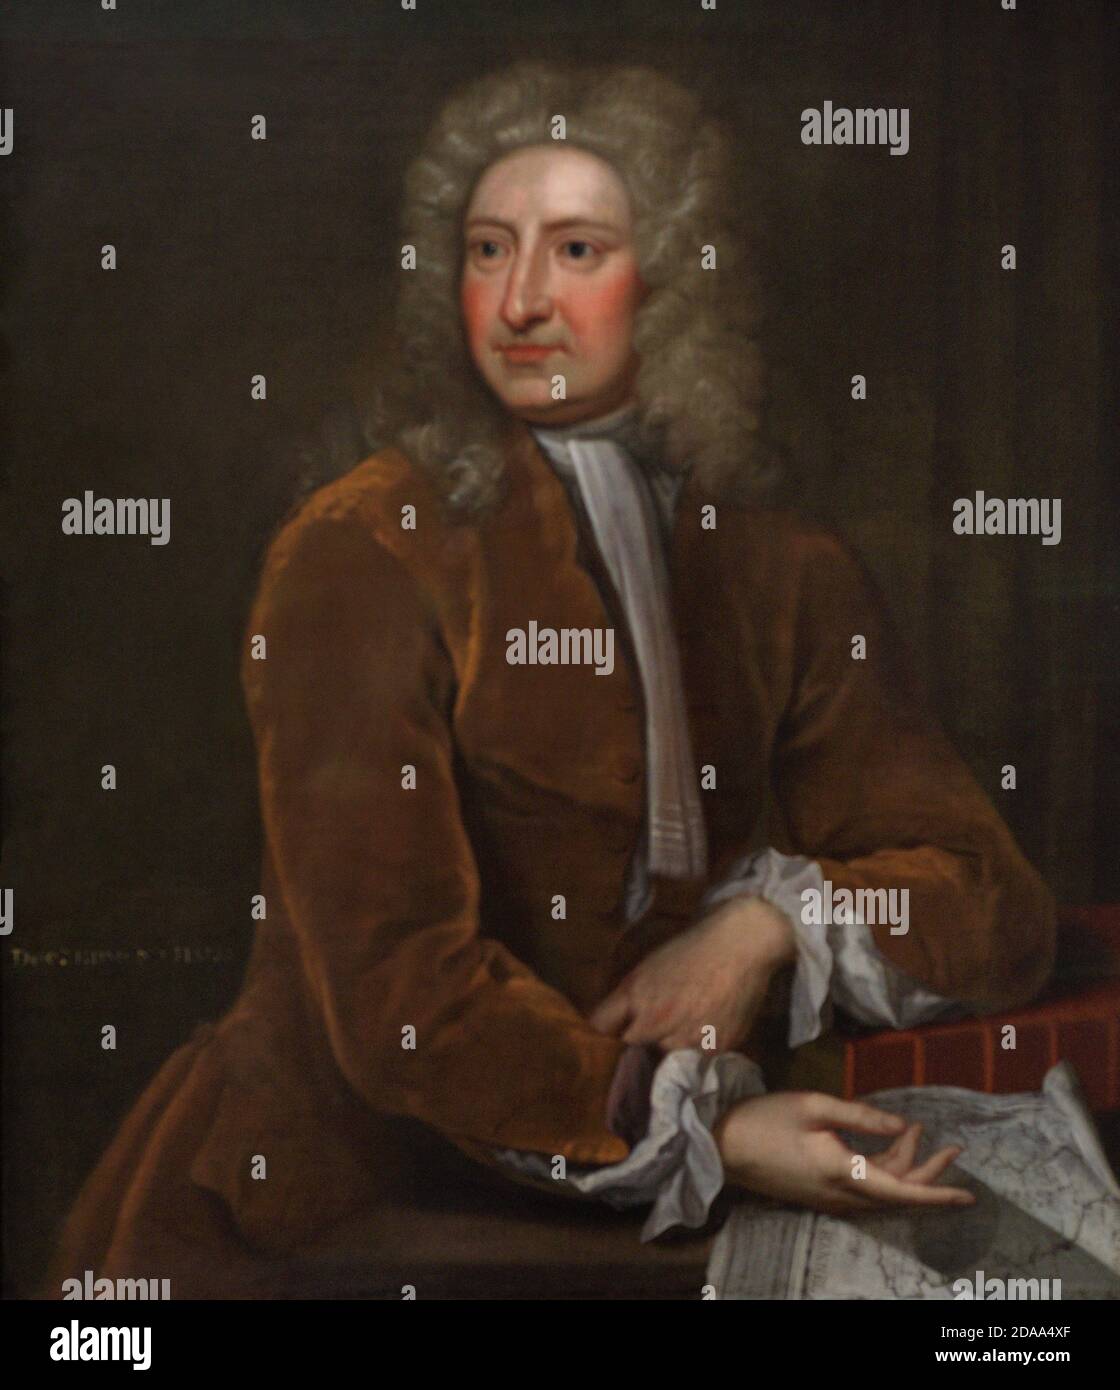 Edmond Halley (1656-1742). British astronomer and mathematician. Portrait attributed to Isaac Whood (1688-1752). Halley is depicted with a volume marked 'Newton' and a chart showing the path across southern England which he predicted for the total solar eclipse of May 3, 1715. Oil on canvas (93,3 x 78,7 cm), c. 1720. National Portrait Gallery. London, England, United Kingdom. Stock Photo